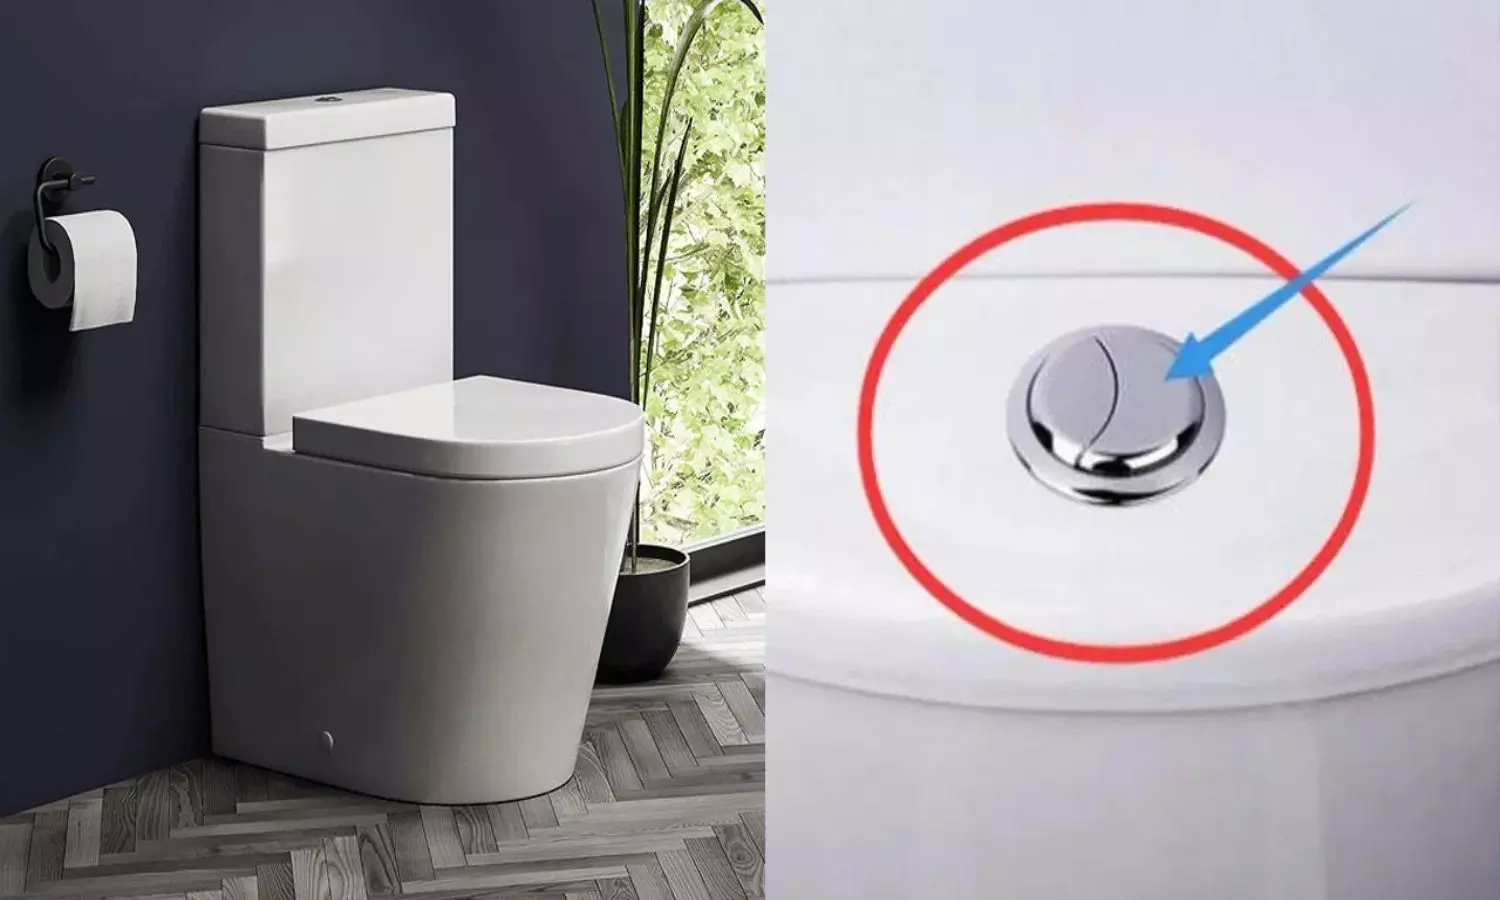 Why Toilet Flush has One Large and one Small Button Check Here Full Reason